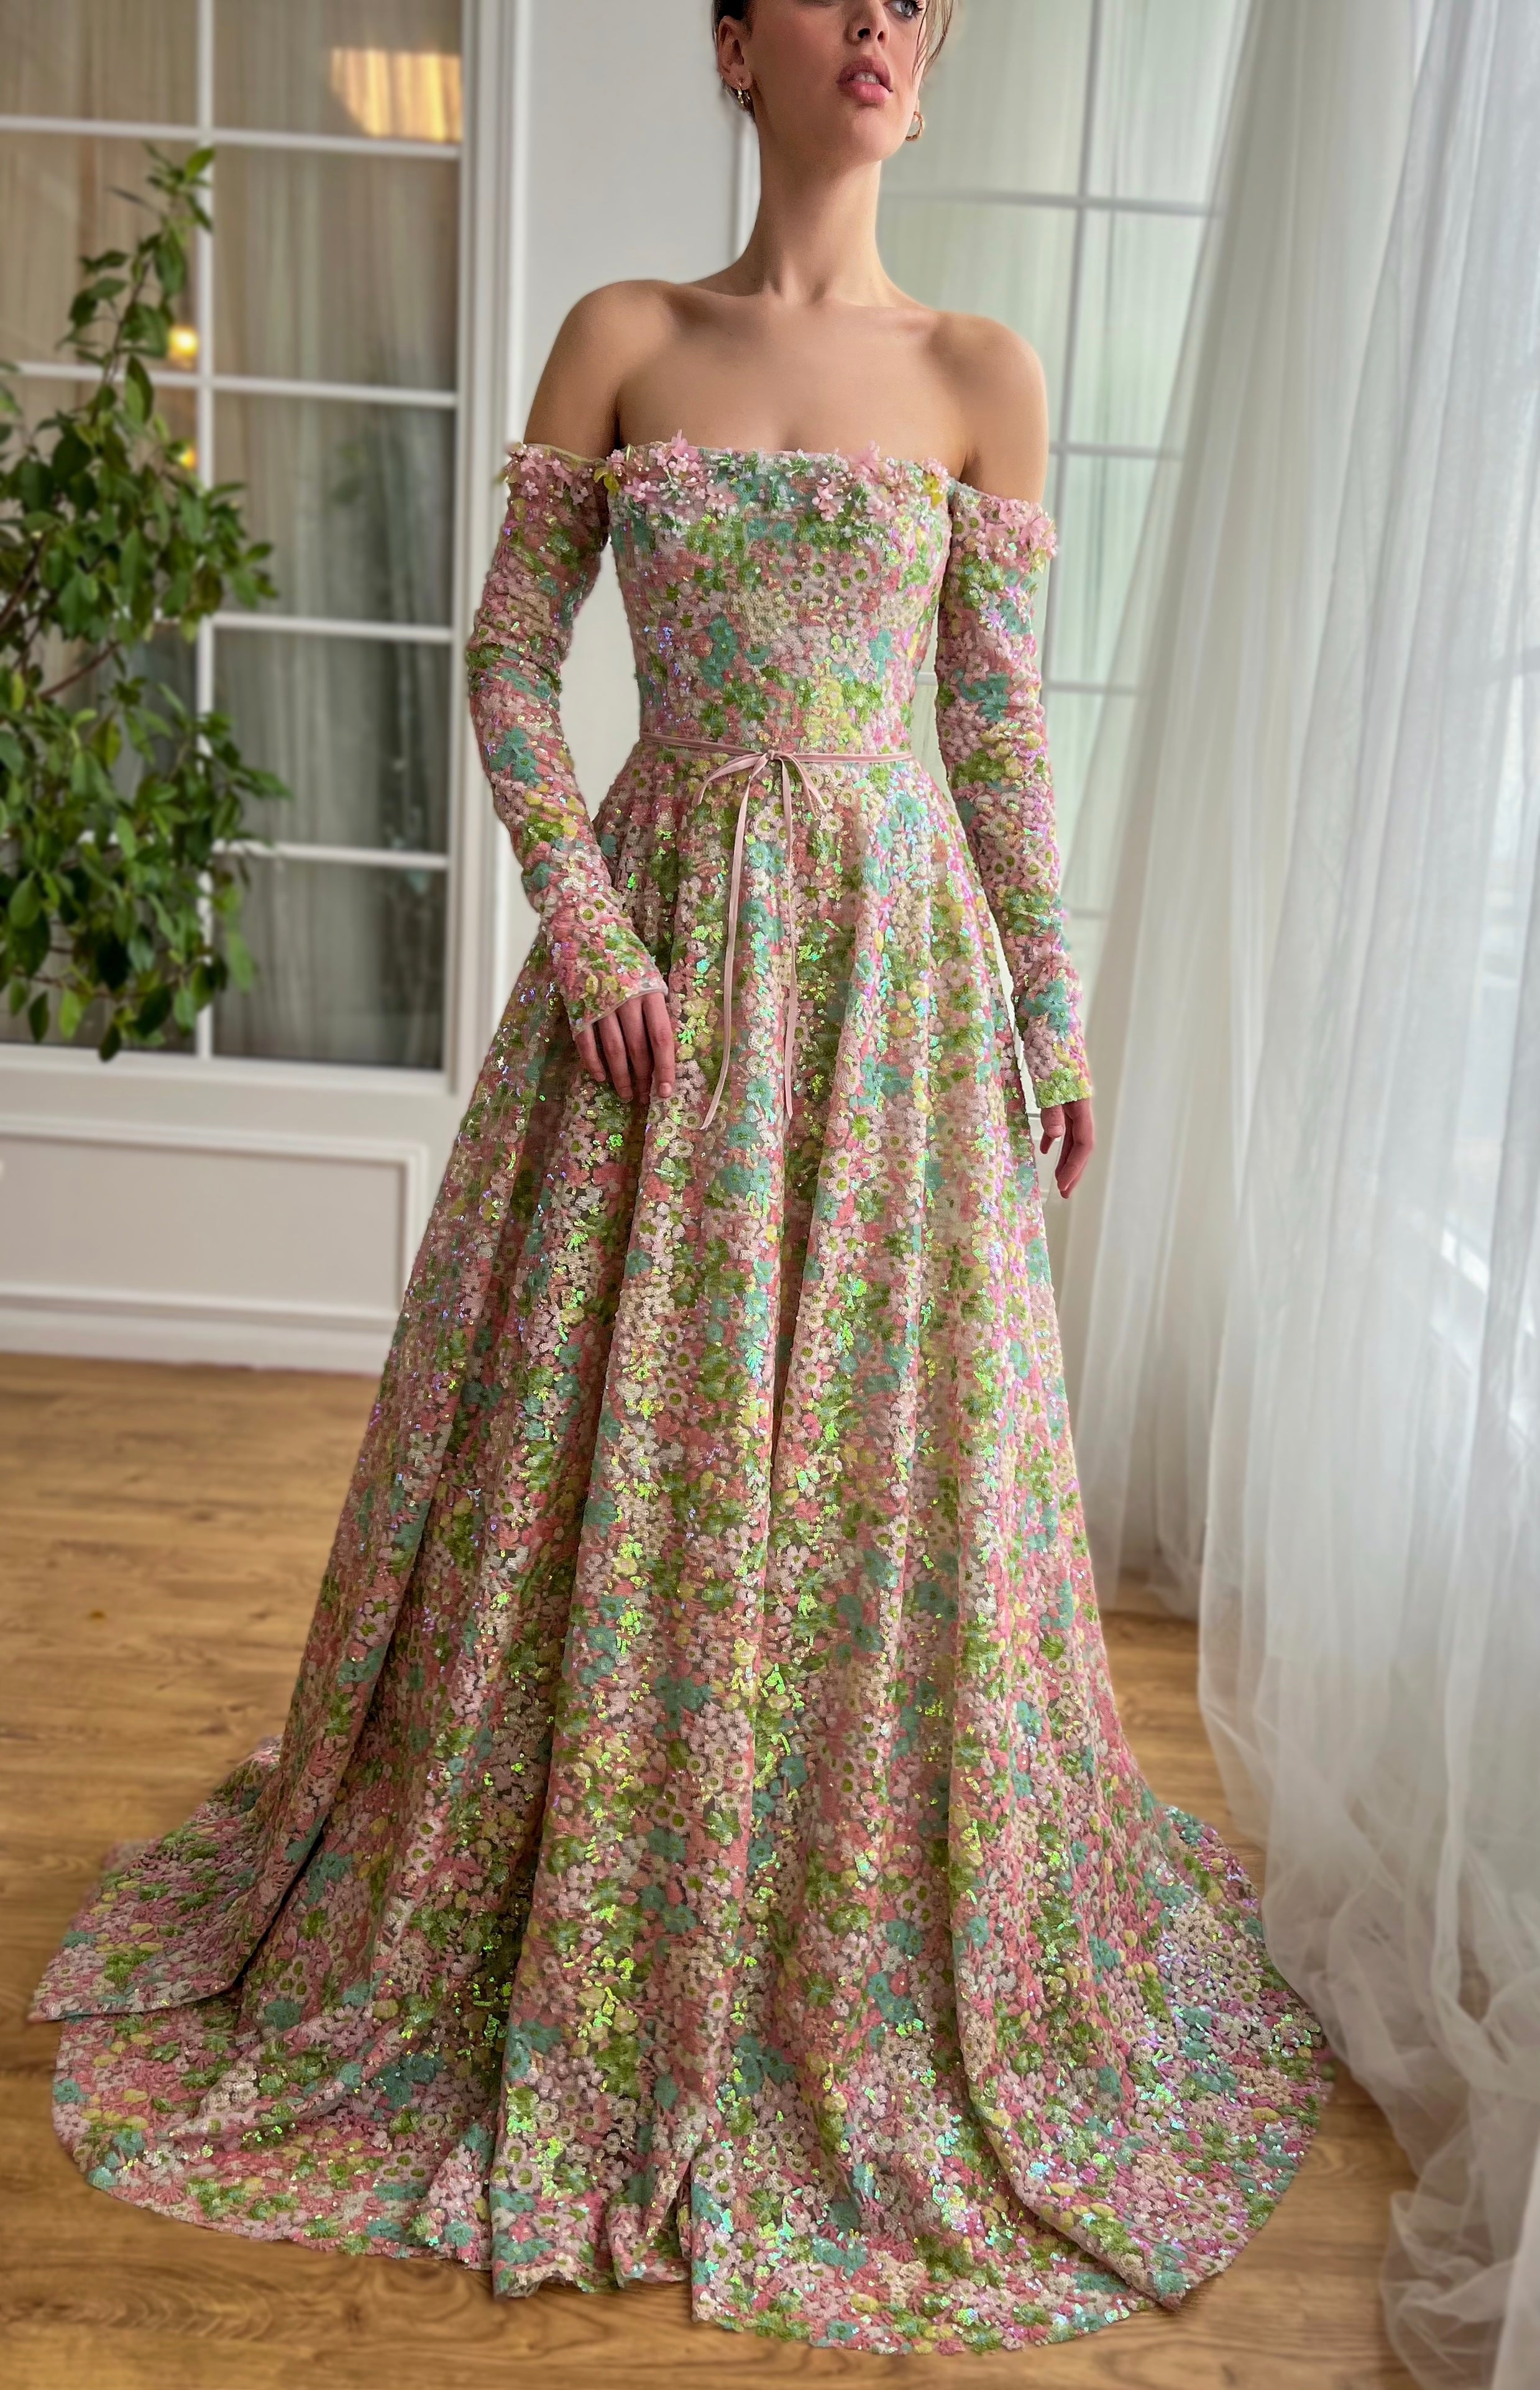 Colorful A-Line dress with long off the shoulder sleeves, embroidery and sequins